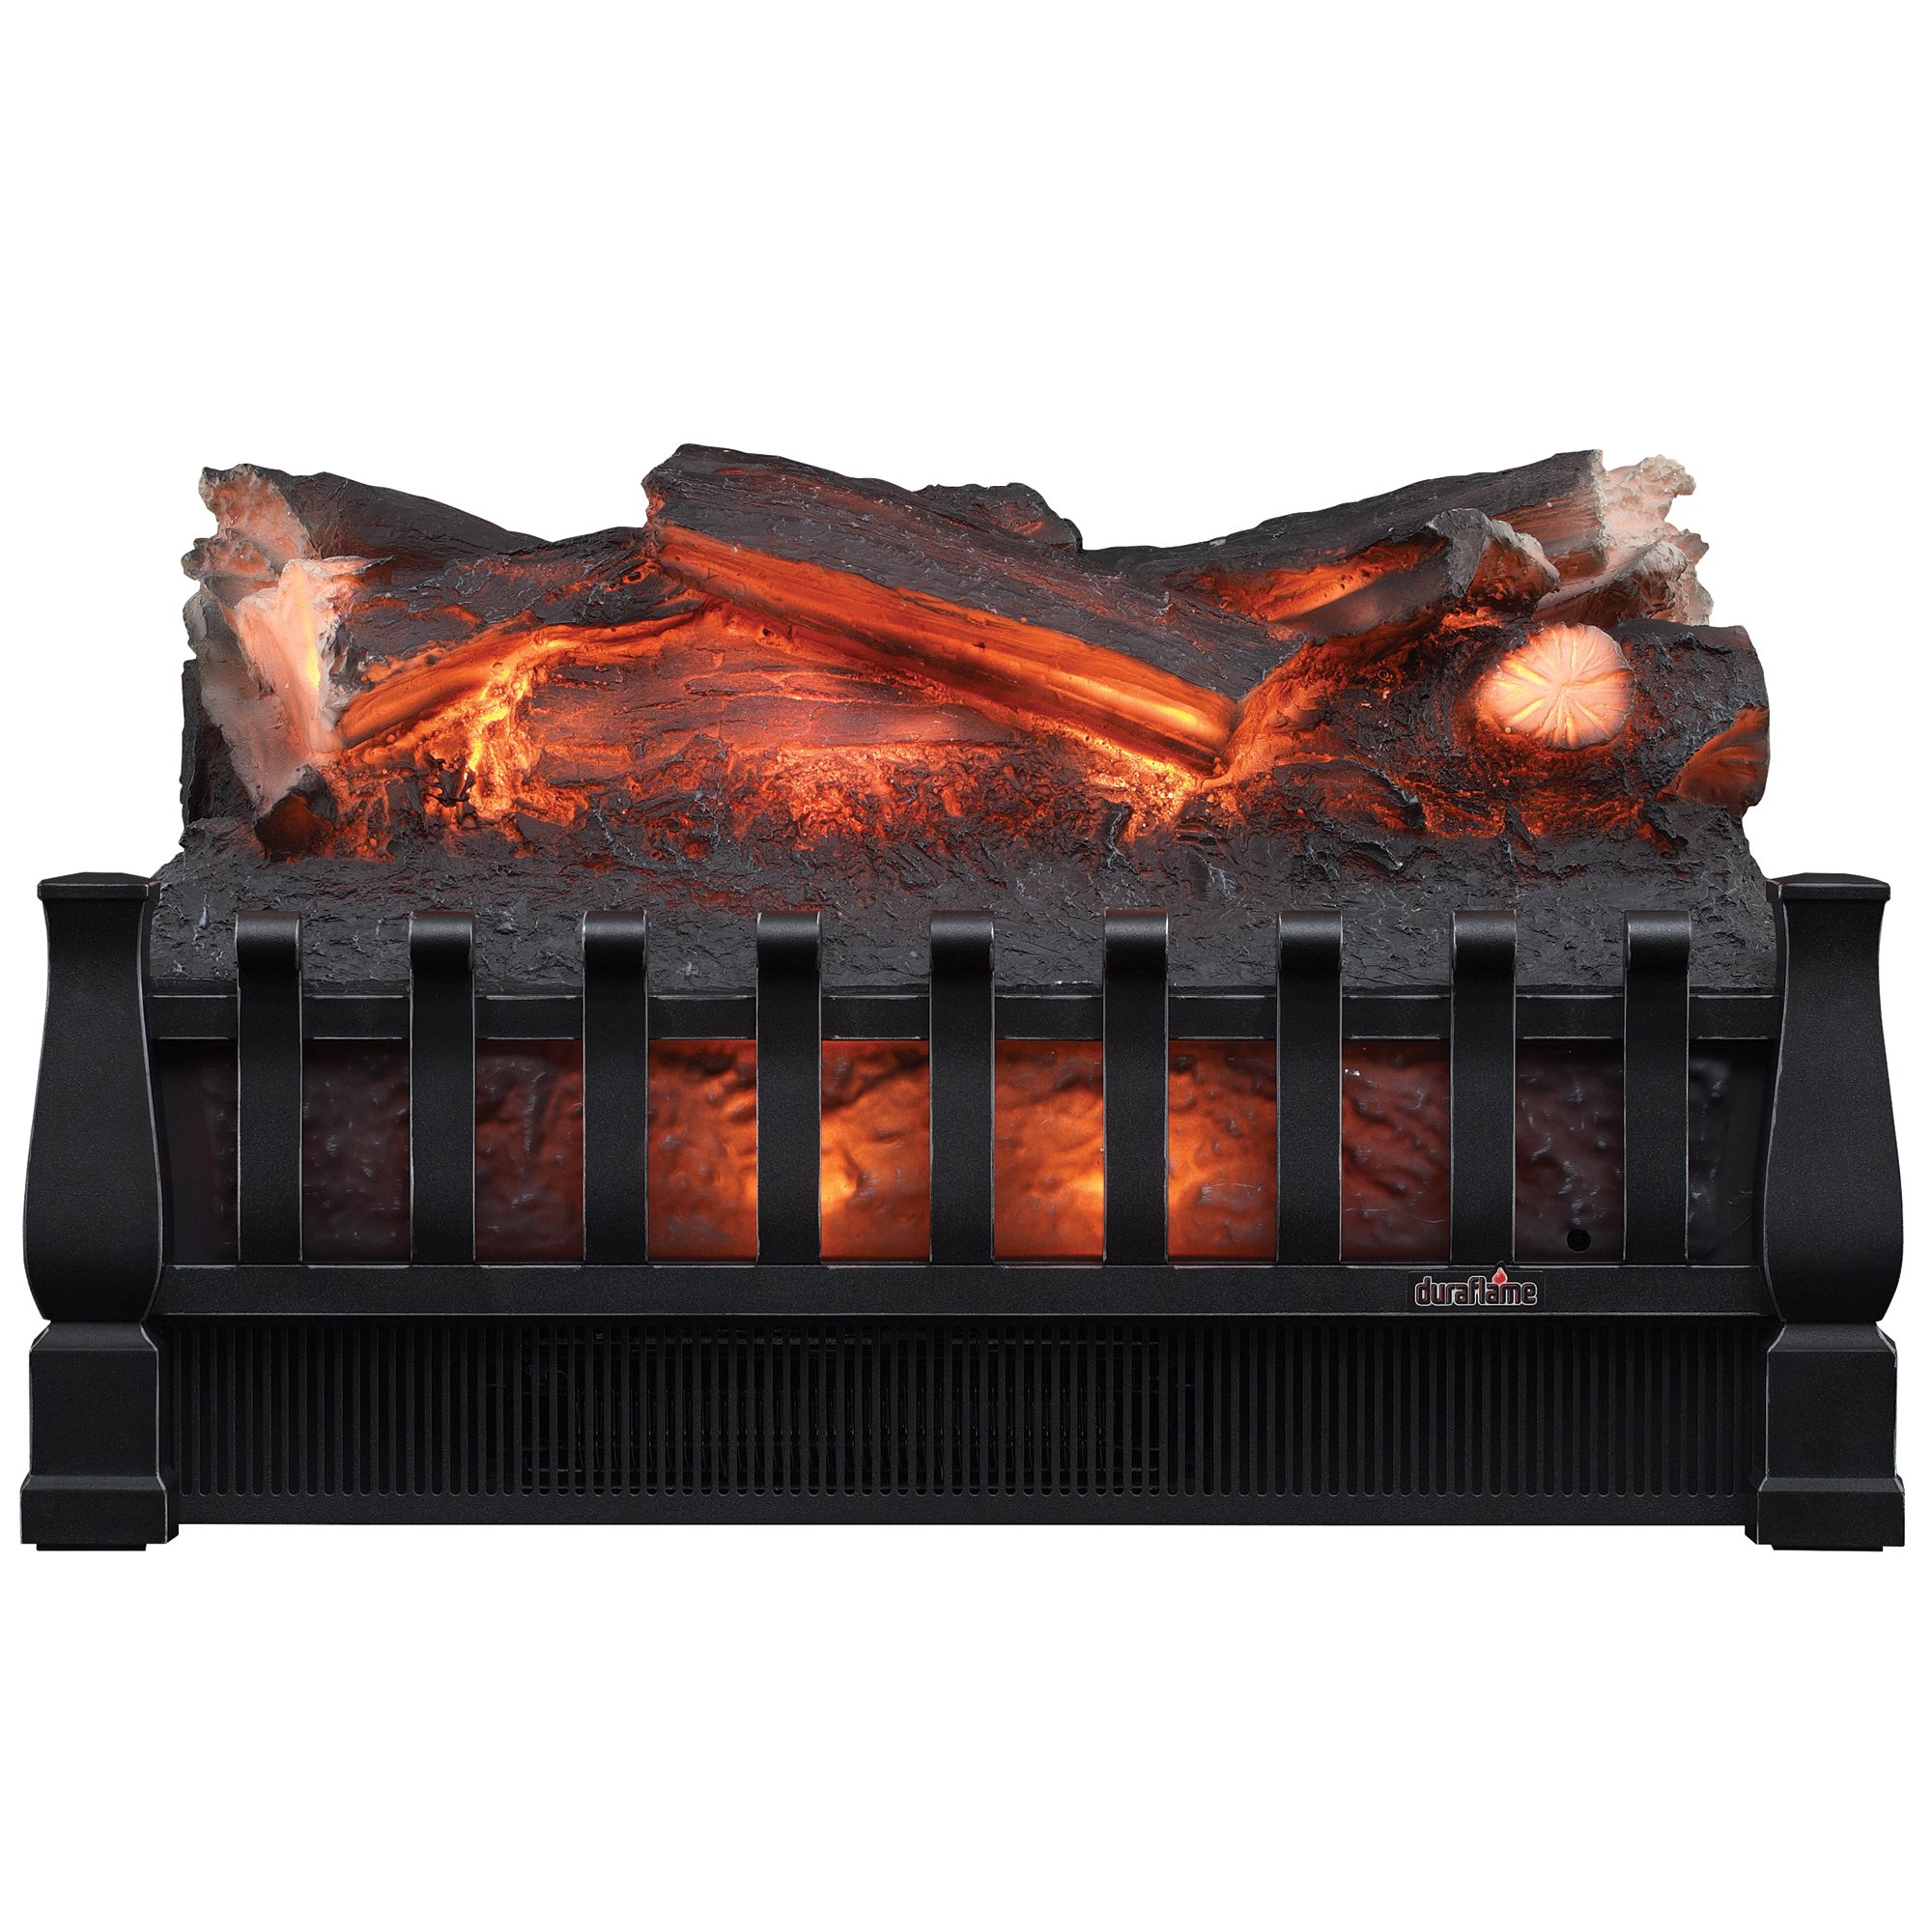 Duraflame Dfi021Aru Electric Log Set Heater With Realistic Ember Bed And Logs, 20.5" W X 8.66" D X 12" H, Black